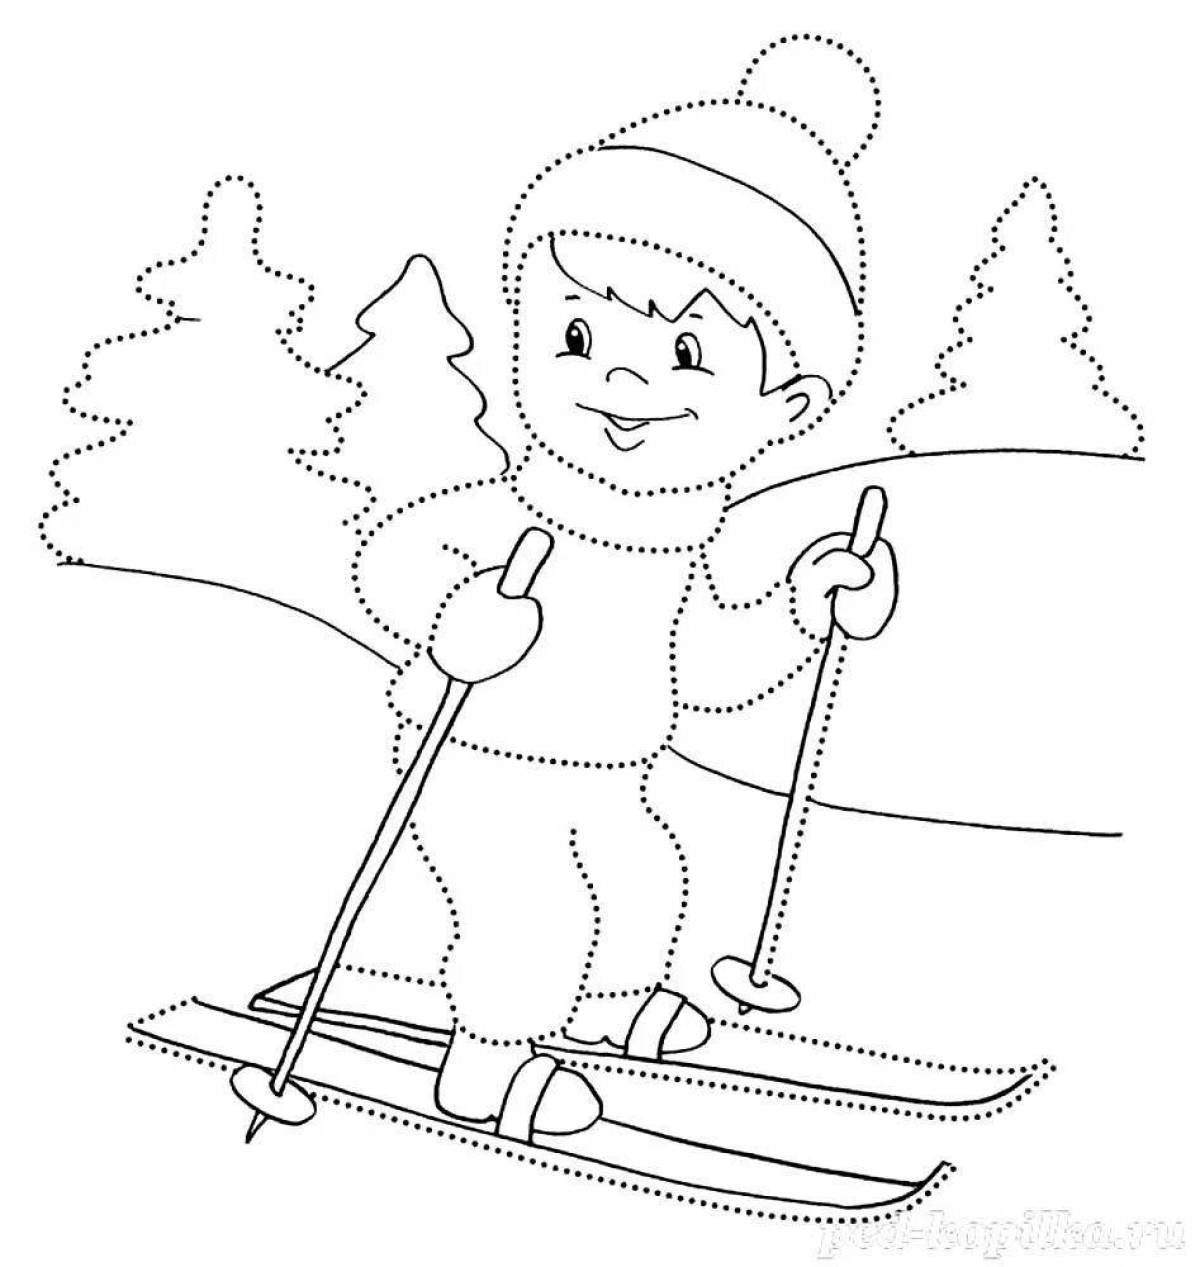 Coloring page of a cheerful skier for children